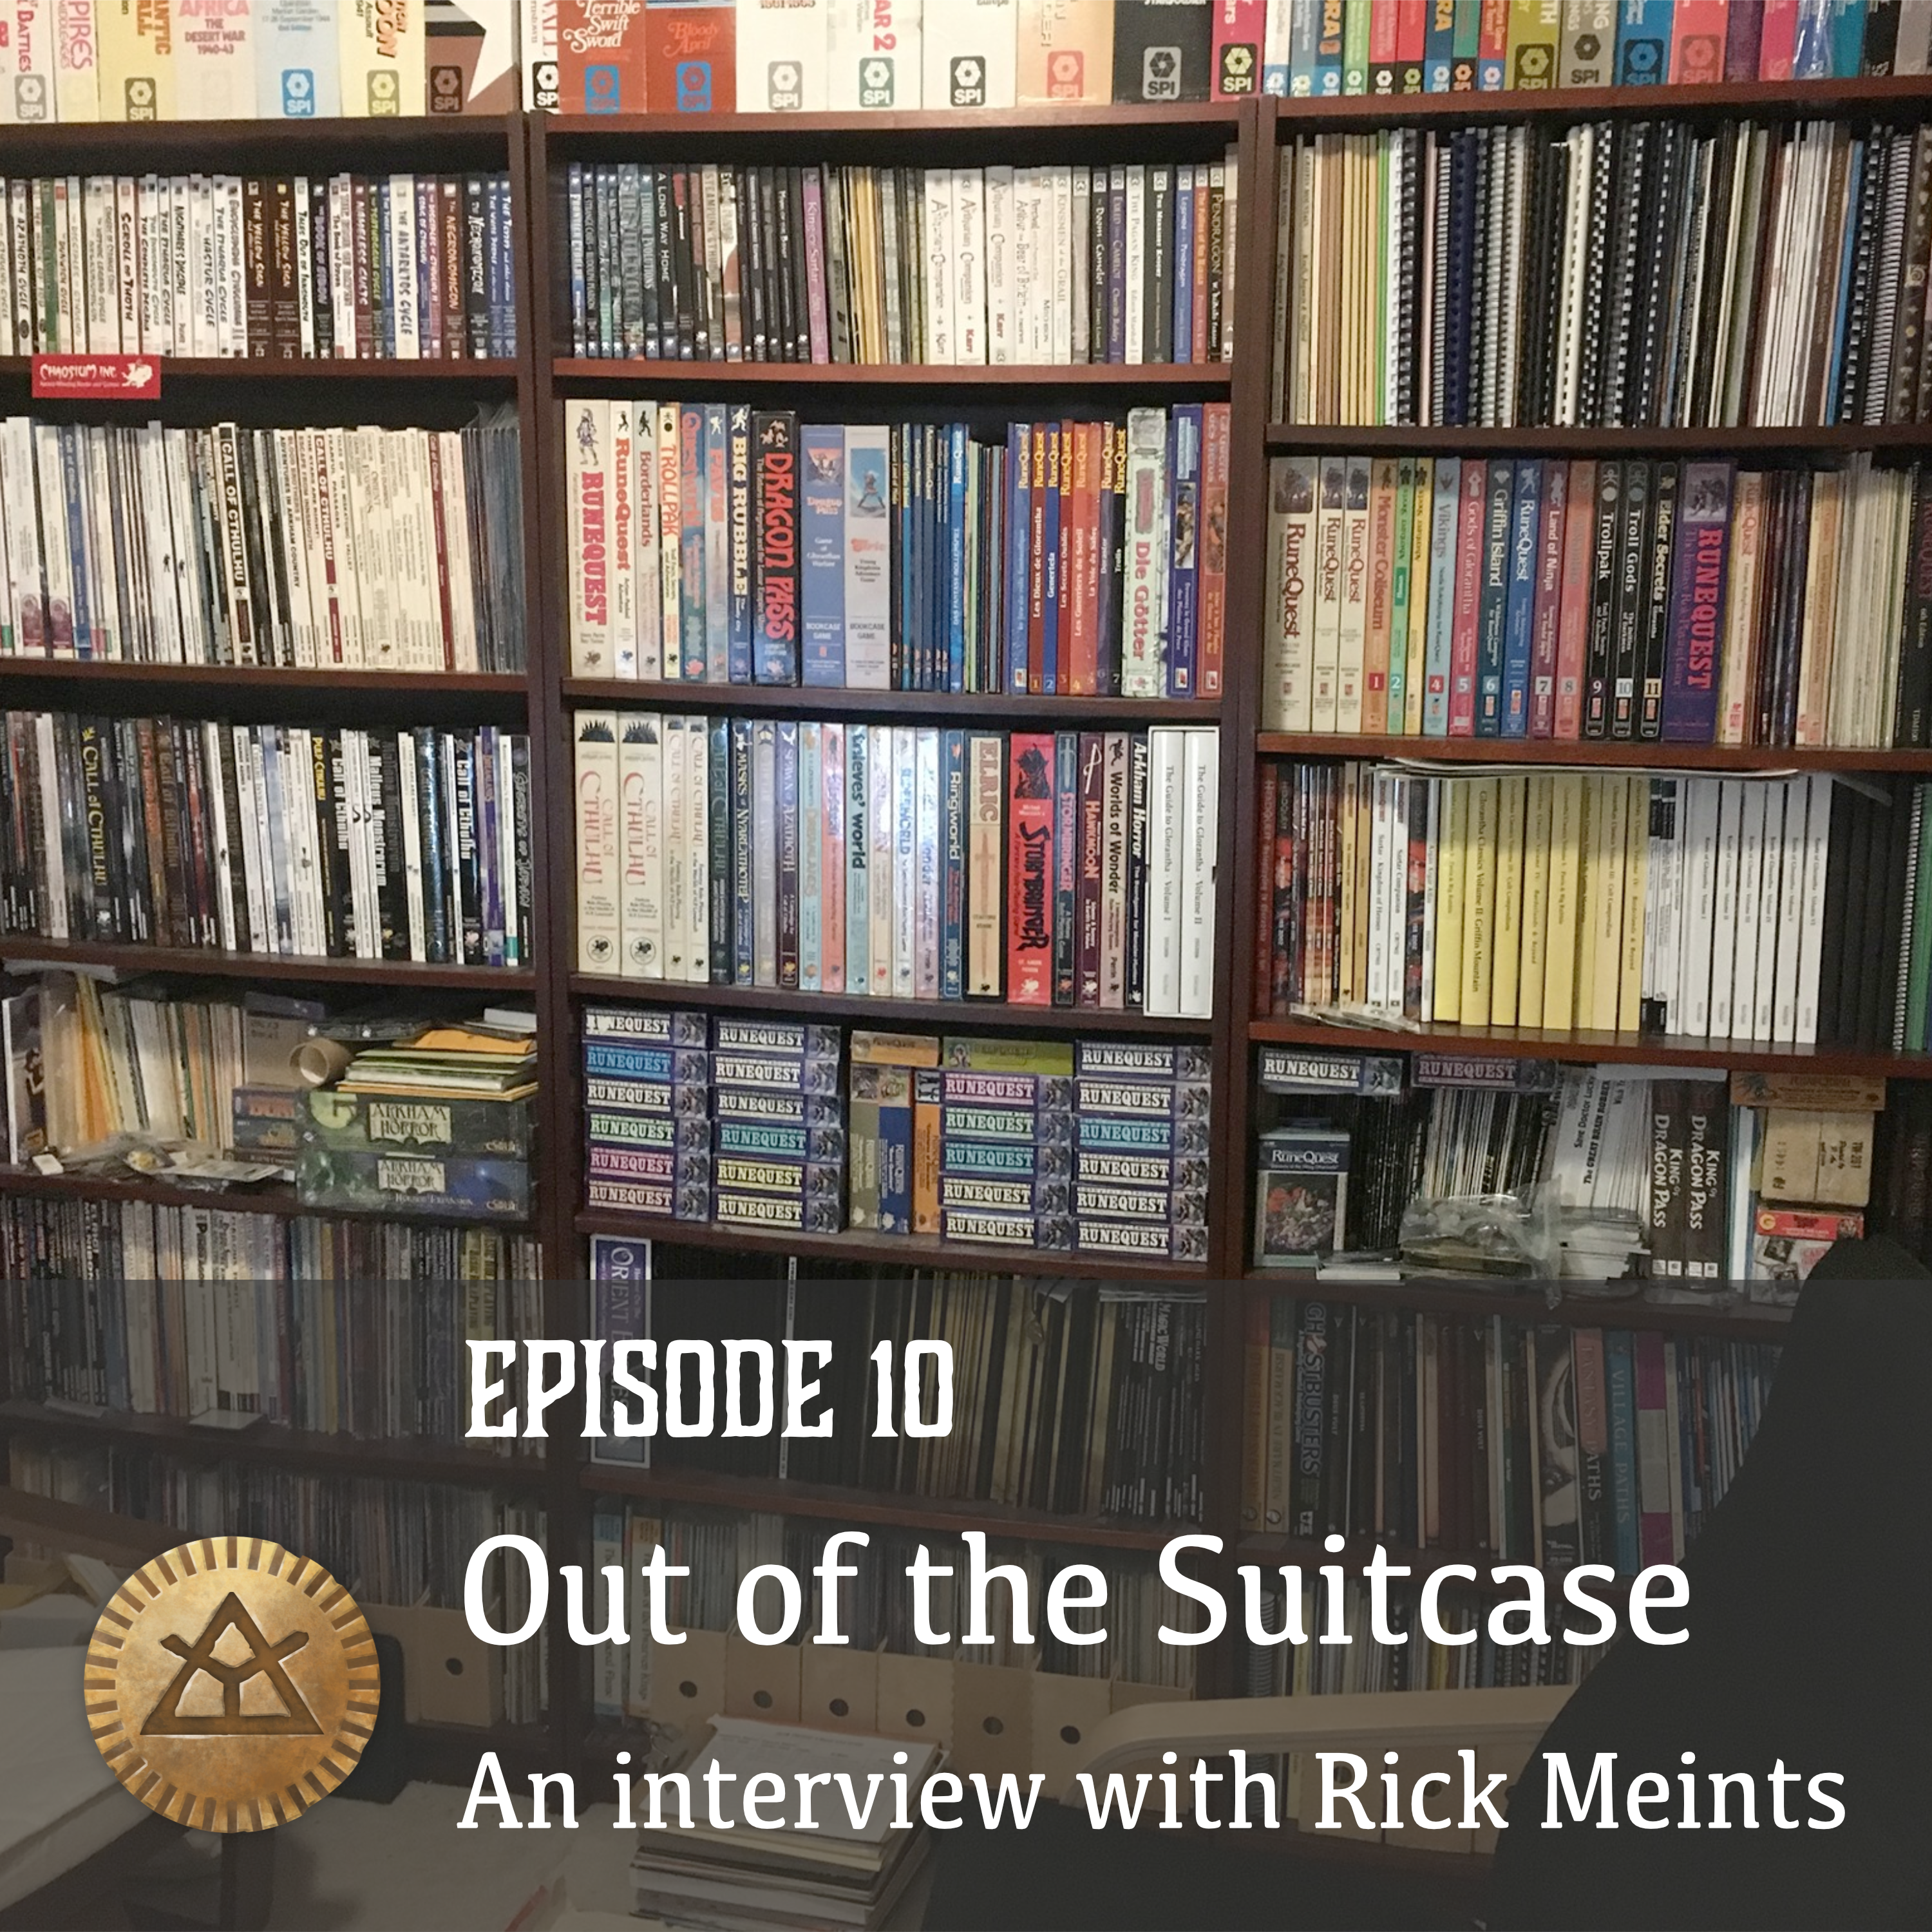 Episode 10: Out of the Suitcase